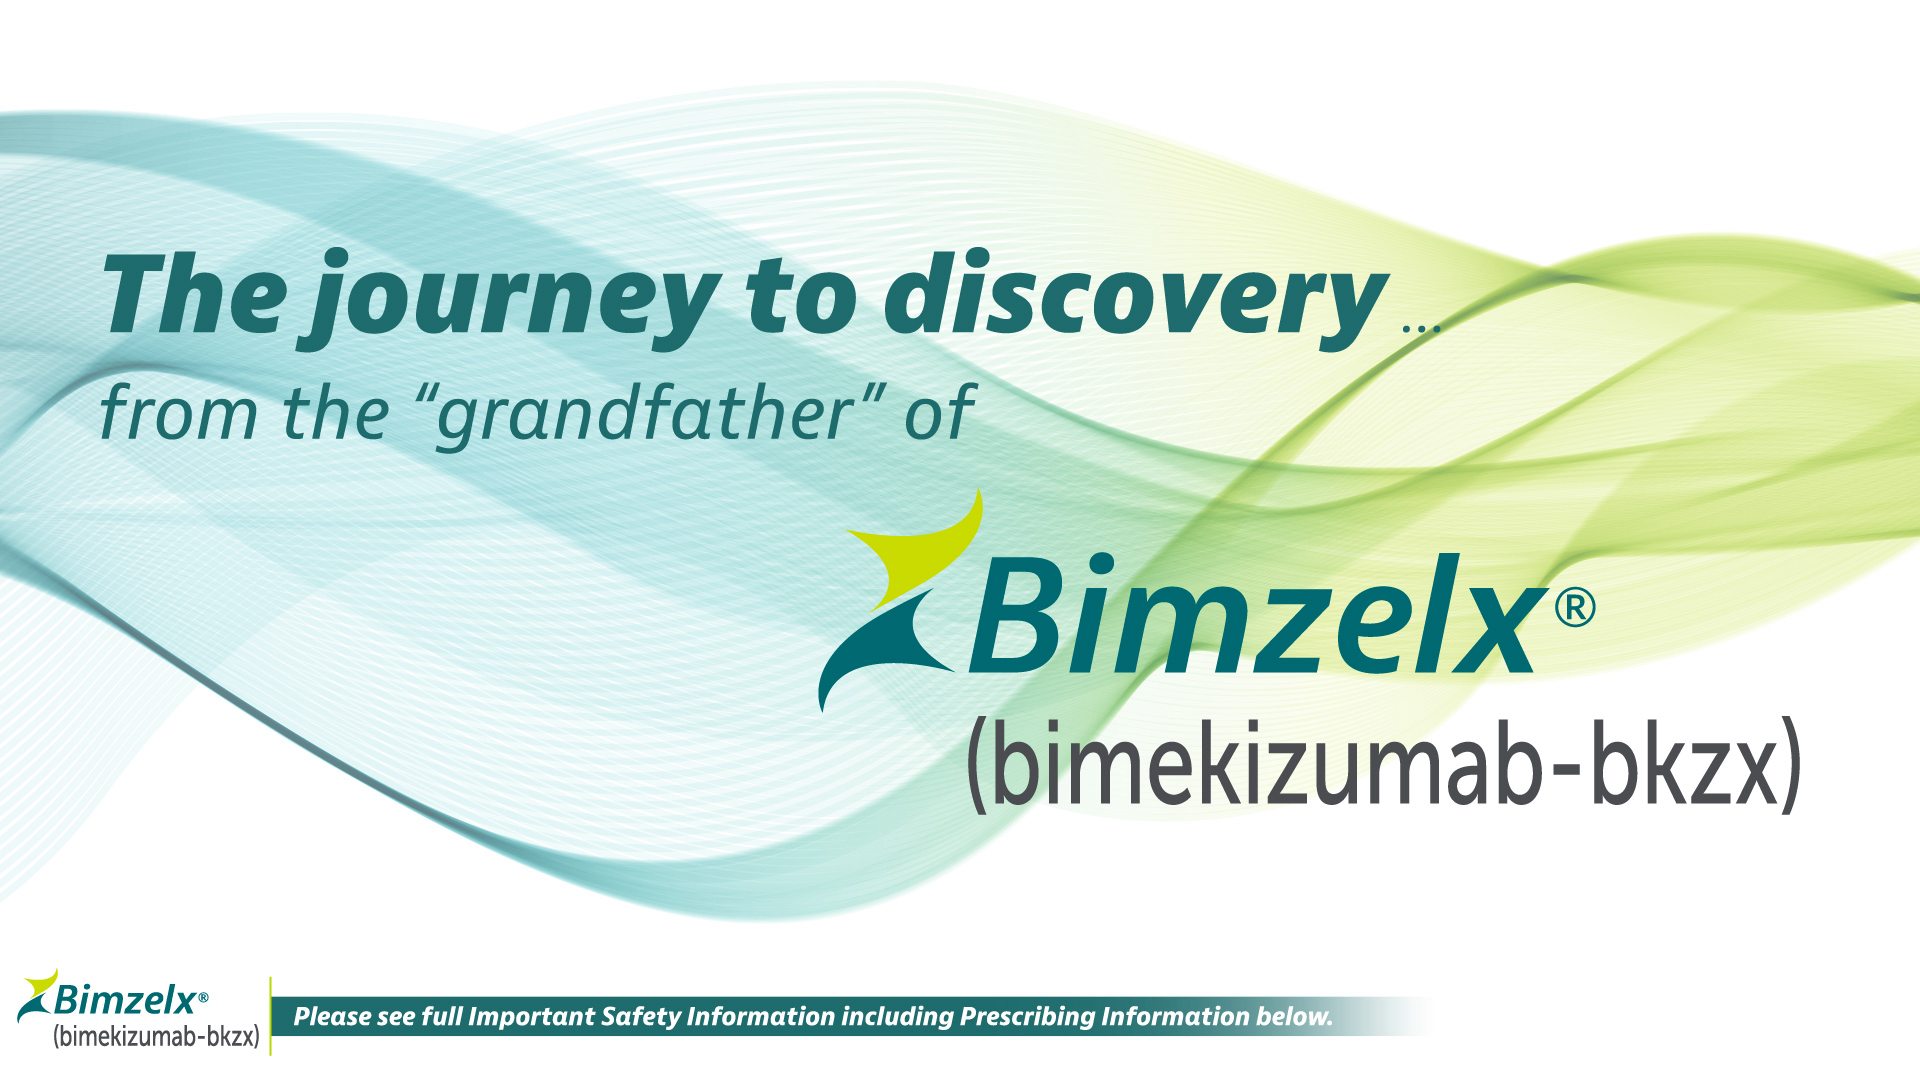 BIMZELX orgin video for HCPs — the BIMZELX logo and the words, “The journey to discovery from the 'grandfather' of BIMZELX" are onscreen.